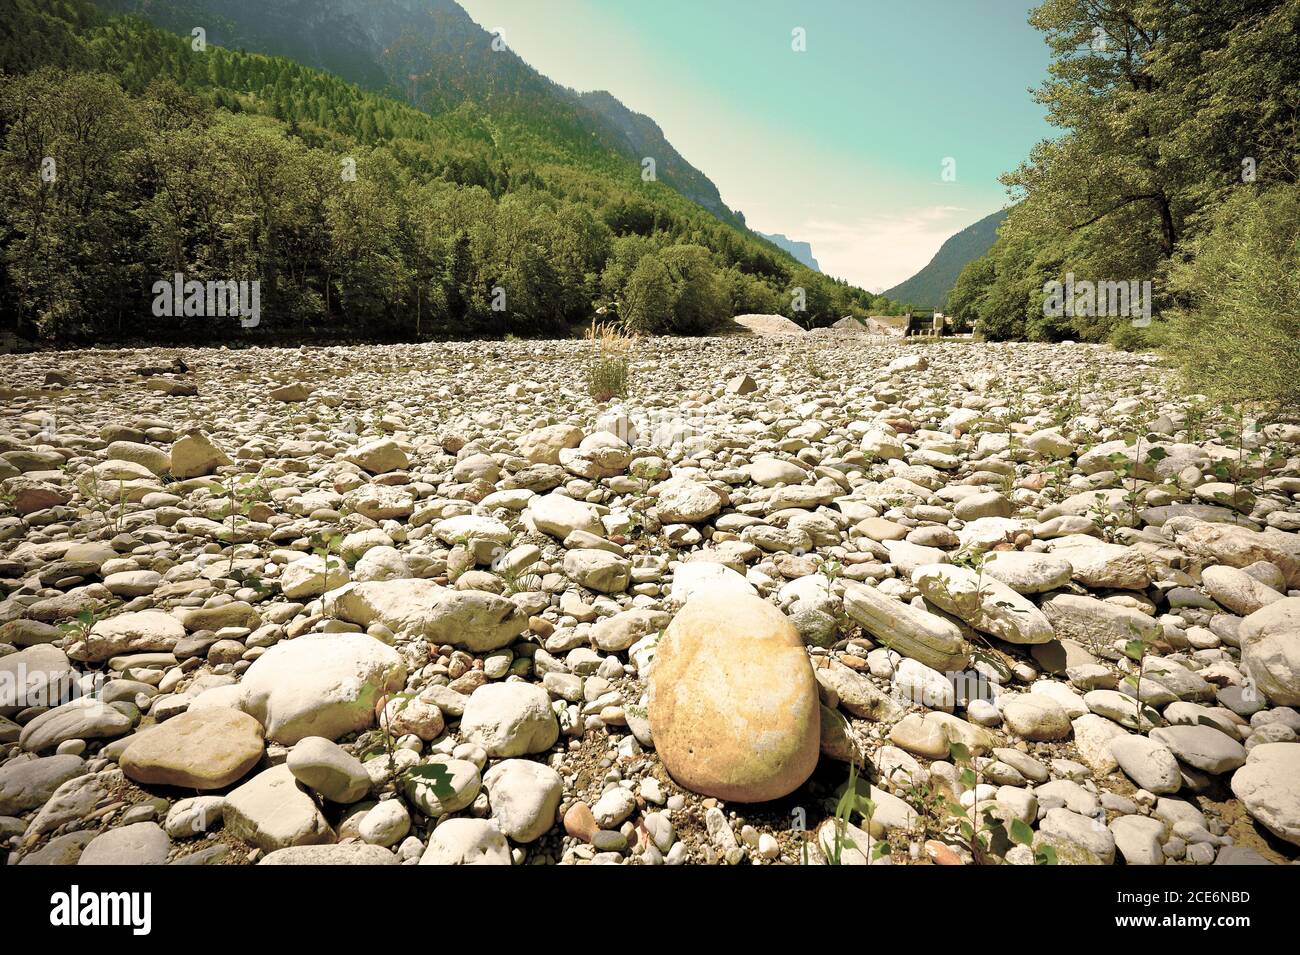 Stones in the dried riverbed Stock Photo